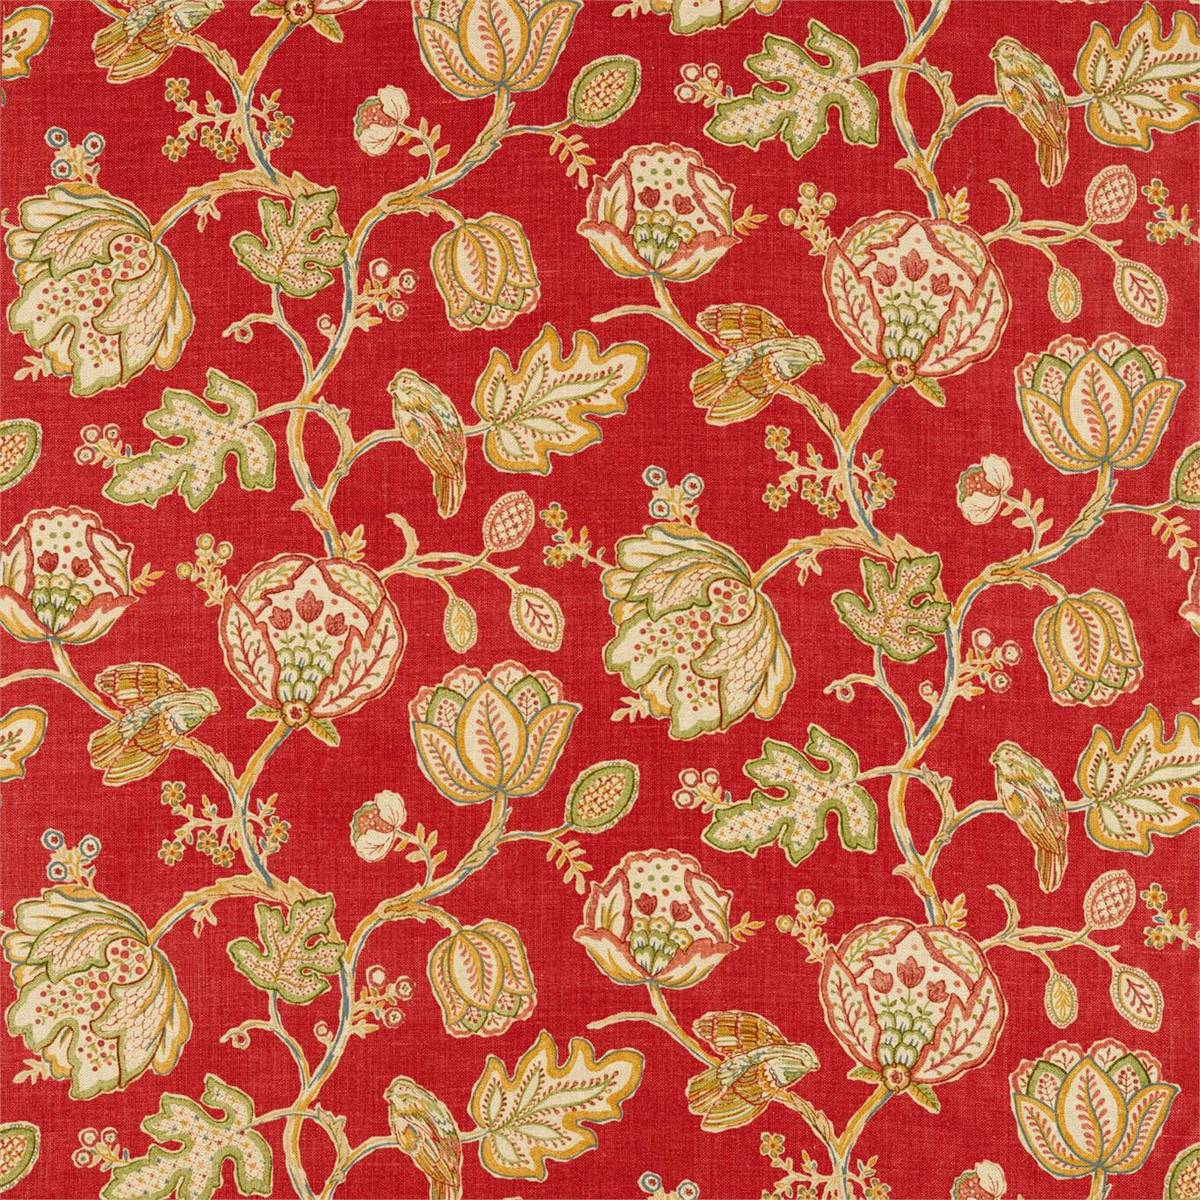 Theodosia Red Fabric by William Morris & Co.